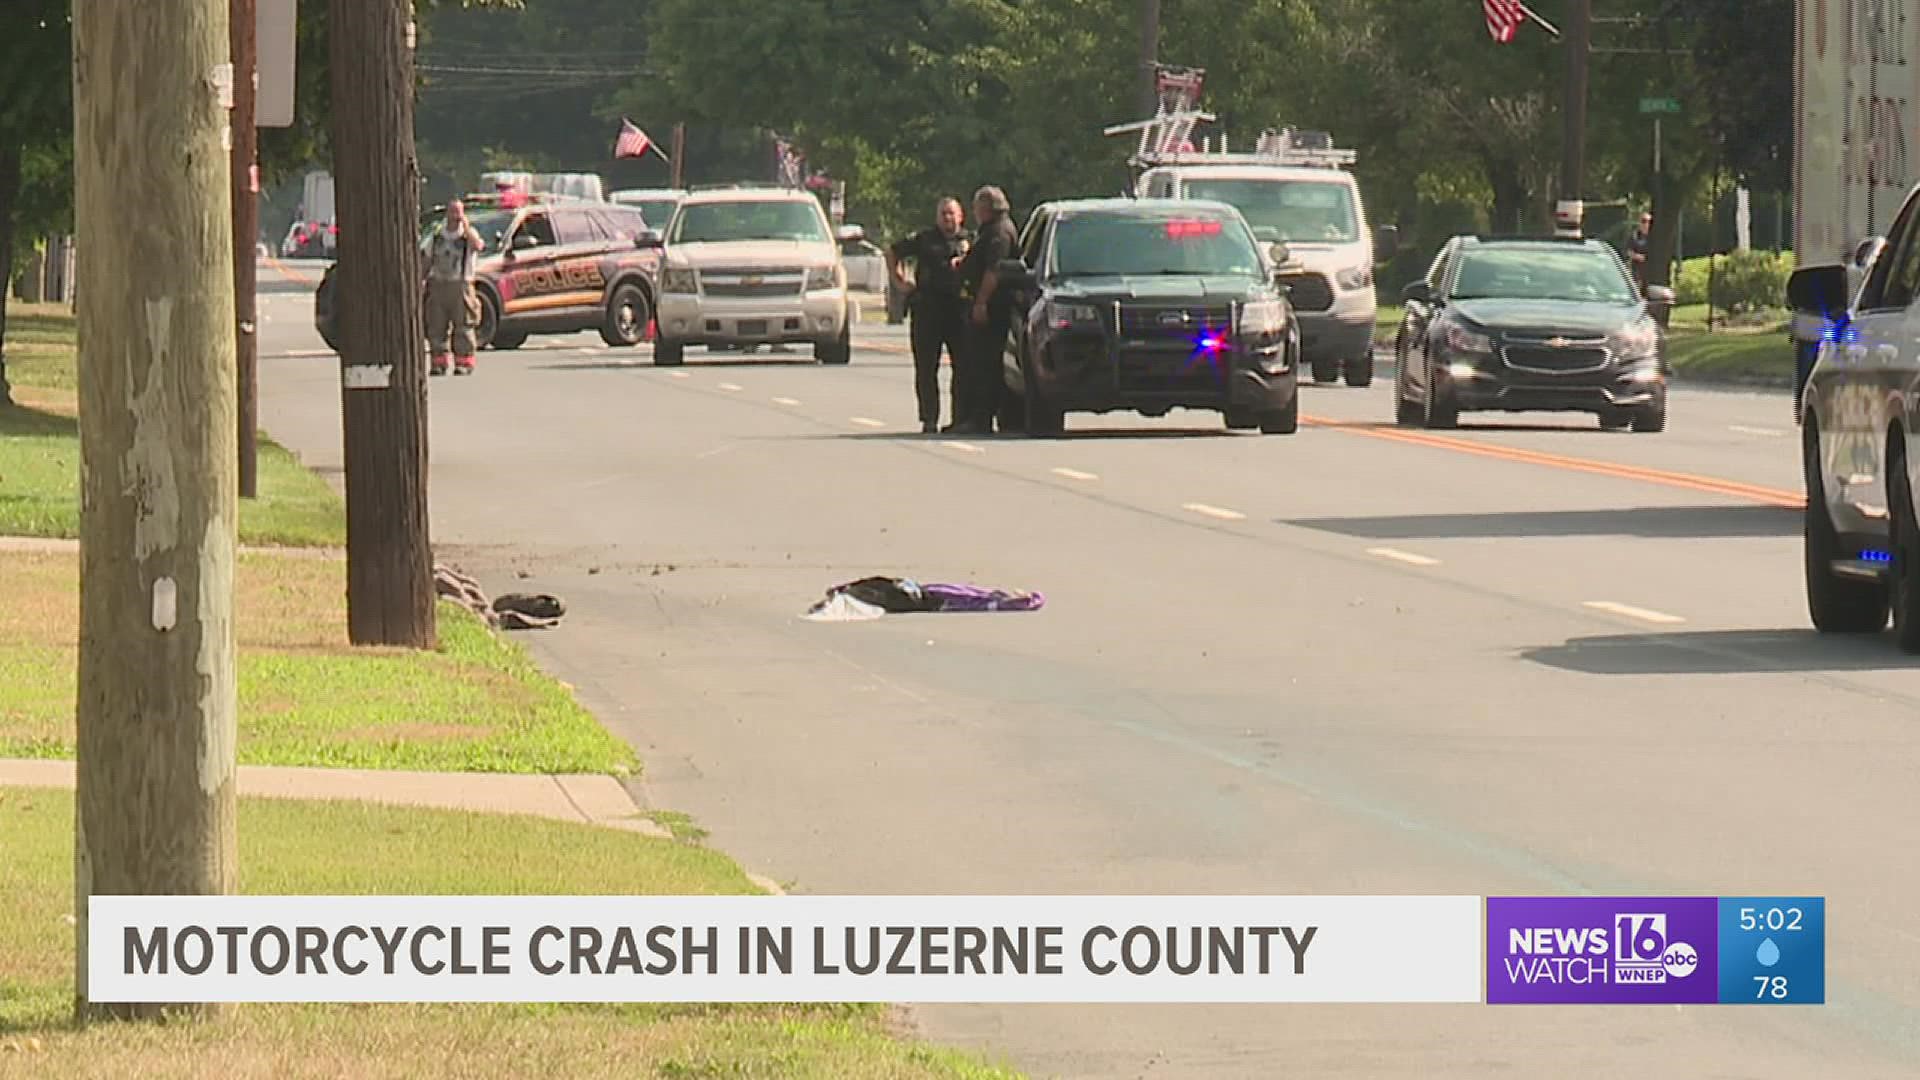 A section of Wyoming Avenue was shut down in one direction for a short time while the crash was cleaned up in Luzerne County.